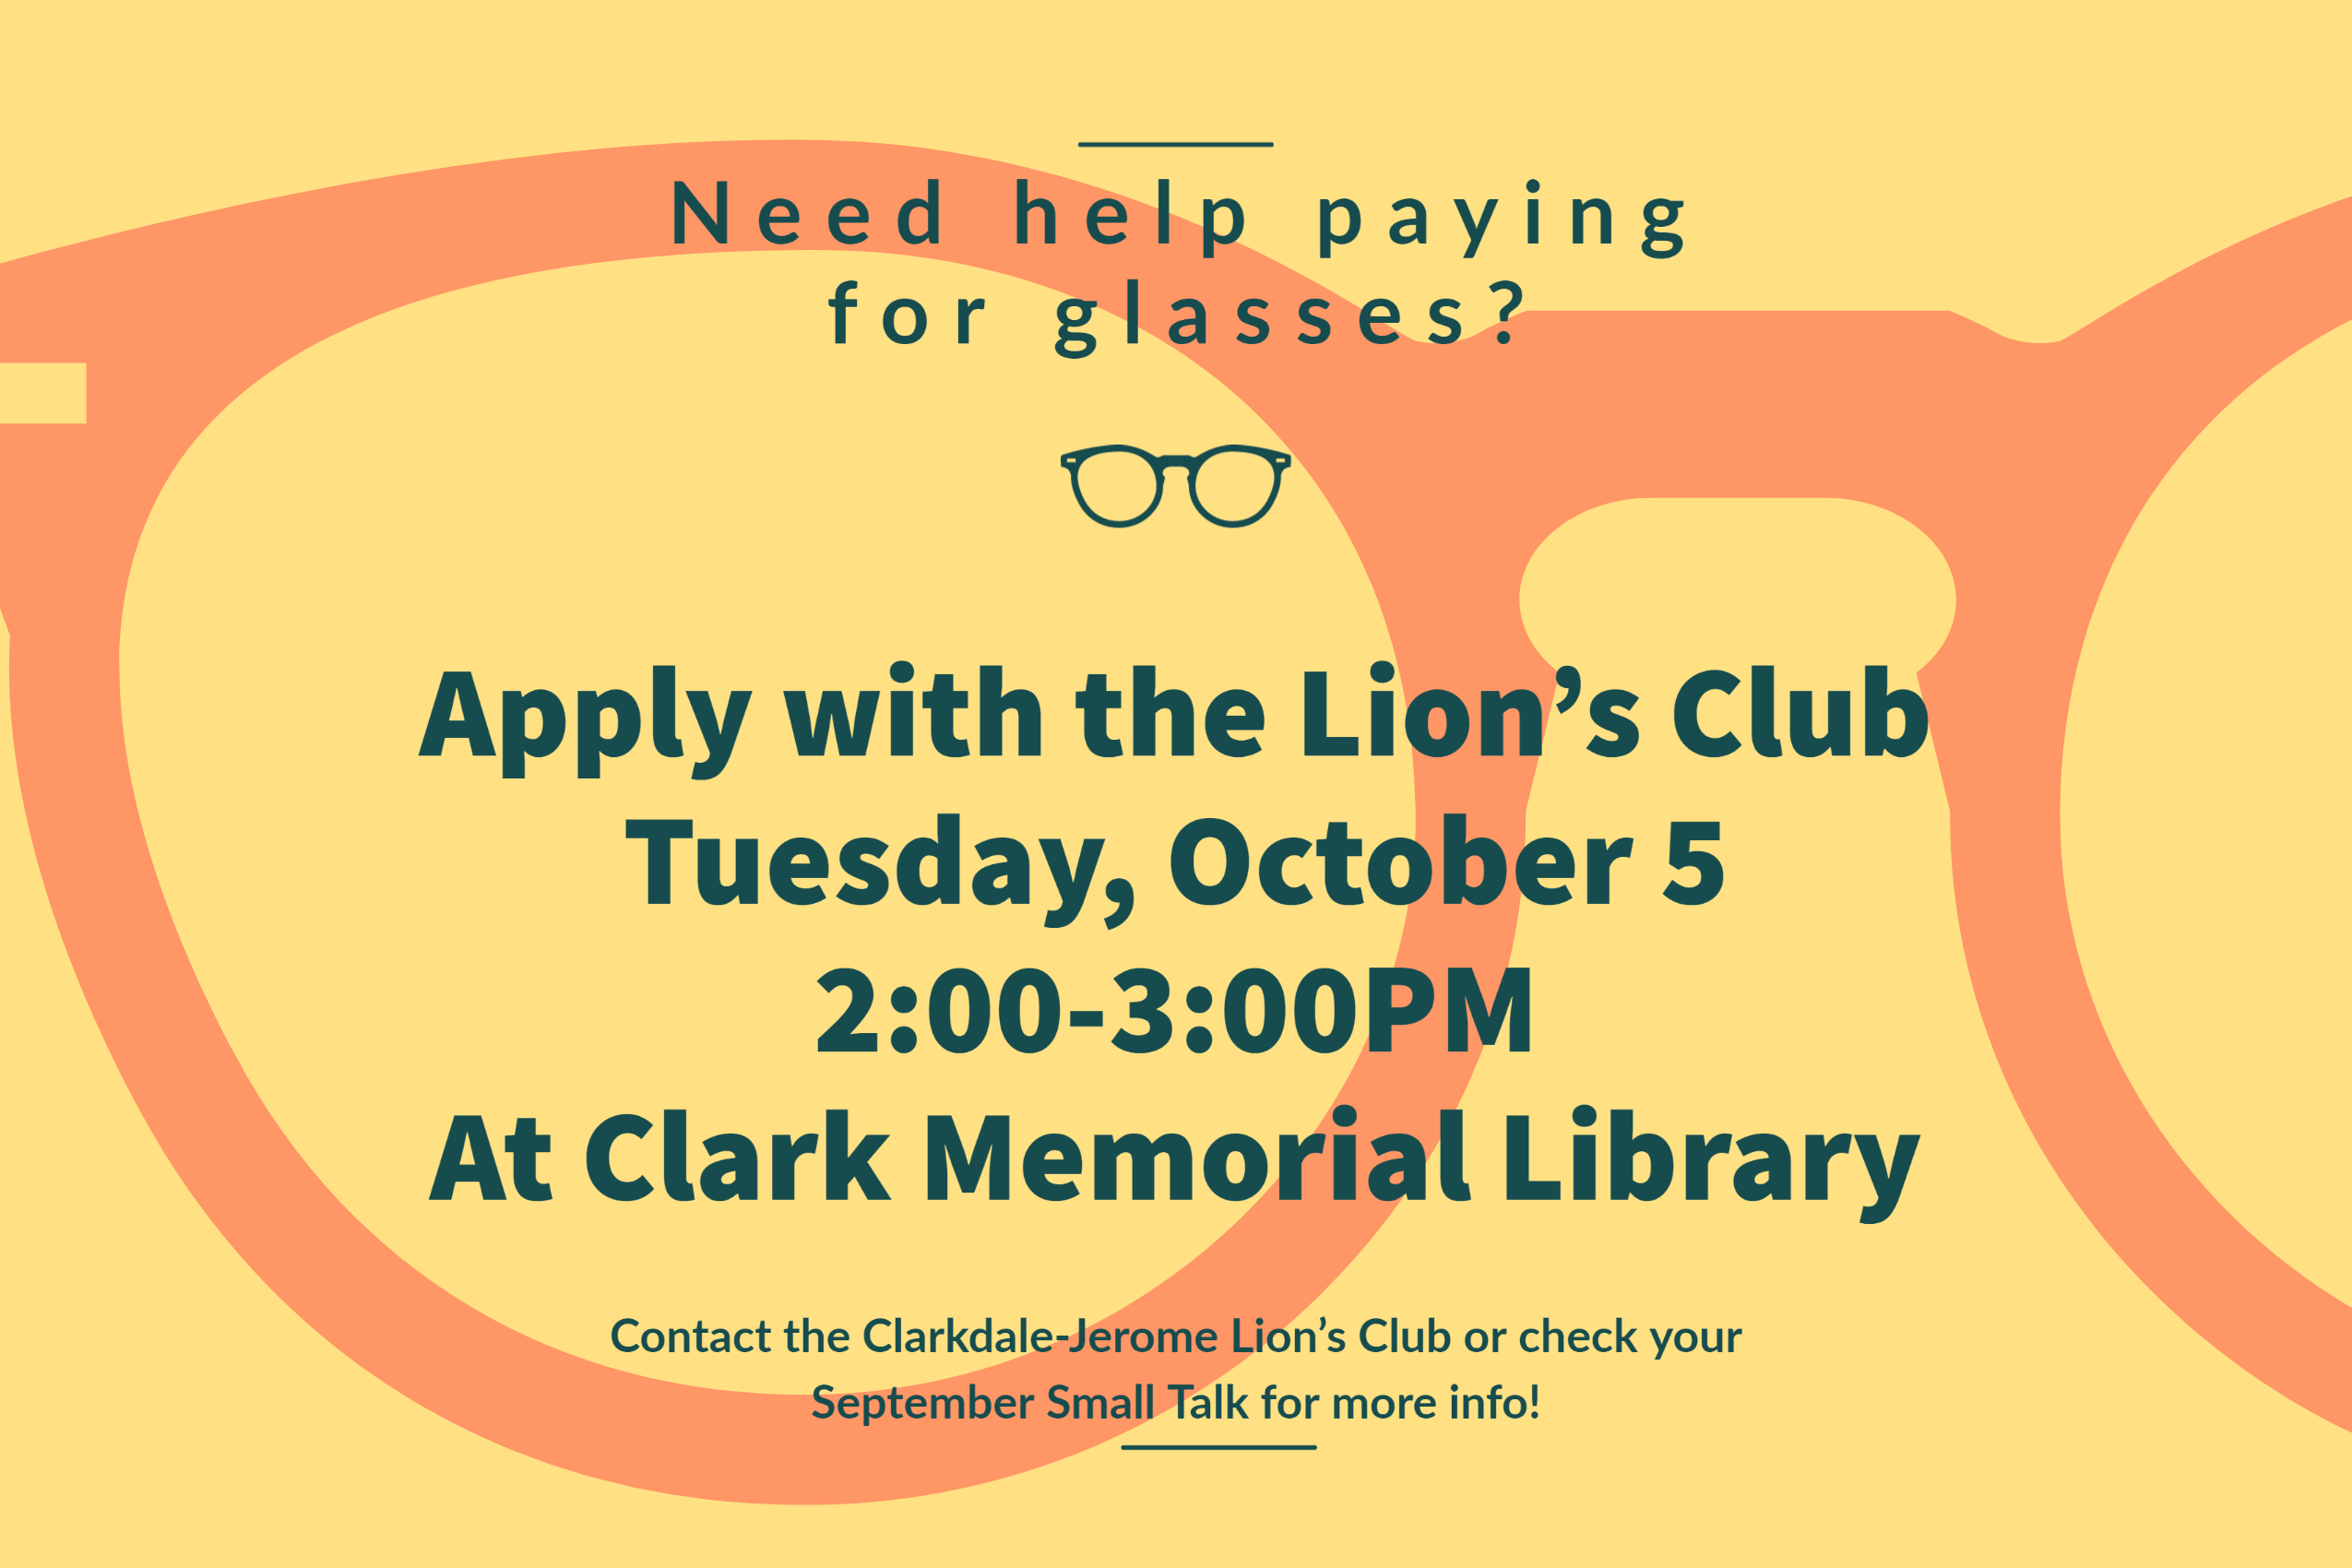 The background of the photo is yellow with the outline or orange glasses. The text reads "Need help paying for glasses? Apply with the Lion's Club Tuesday, October 5 2:00-3:00PM at Clark Memorial Library. Contact the Clarkdale-Jerome Lion's Club or check your September Small Talk for more info!"